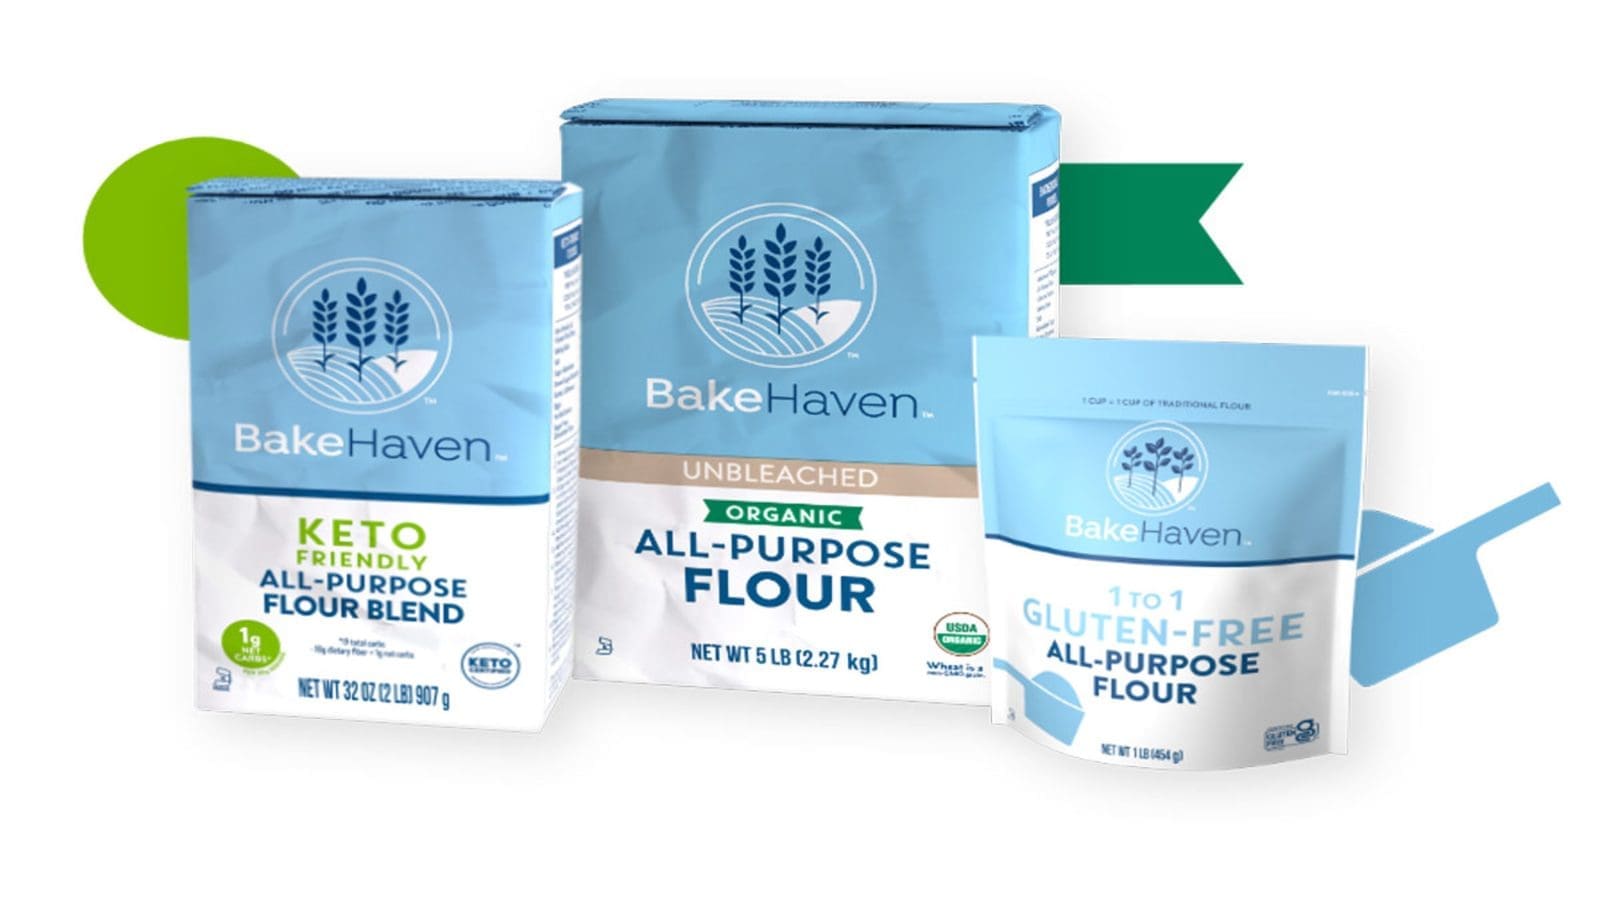 Ardent Mills launches new private label flour brand ‘BakeHaven’ targeting emerging retailers